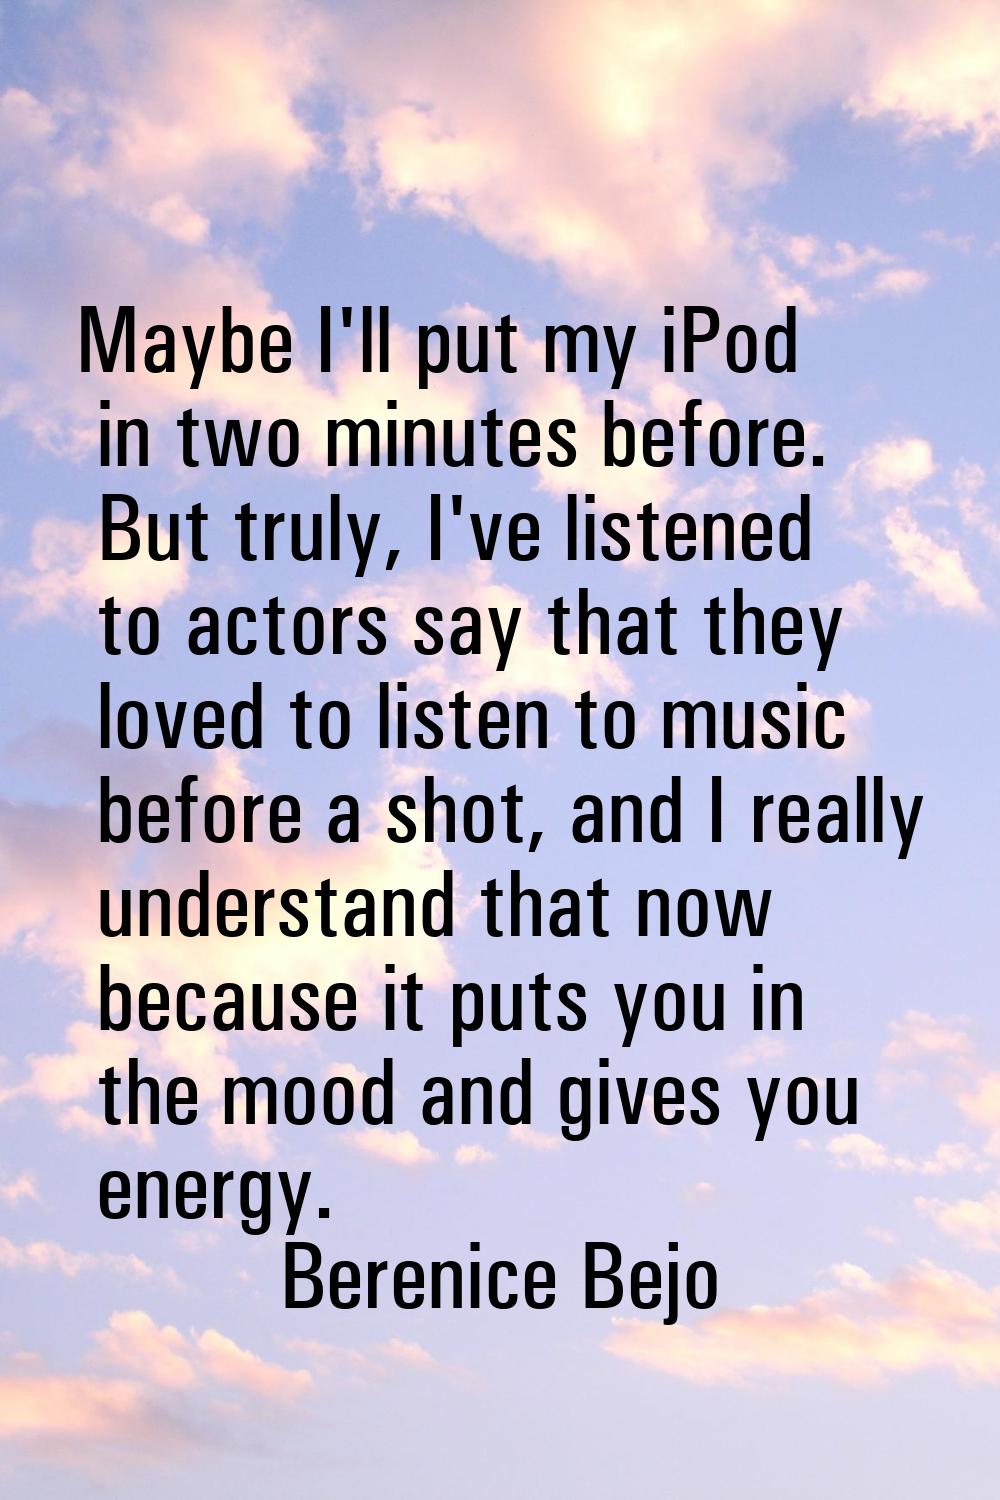 Maybe I'll put my iPod in two minutes before. But truly, I've listened to actors say that they love